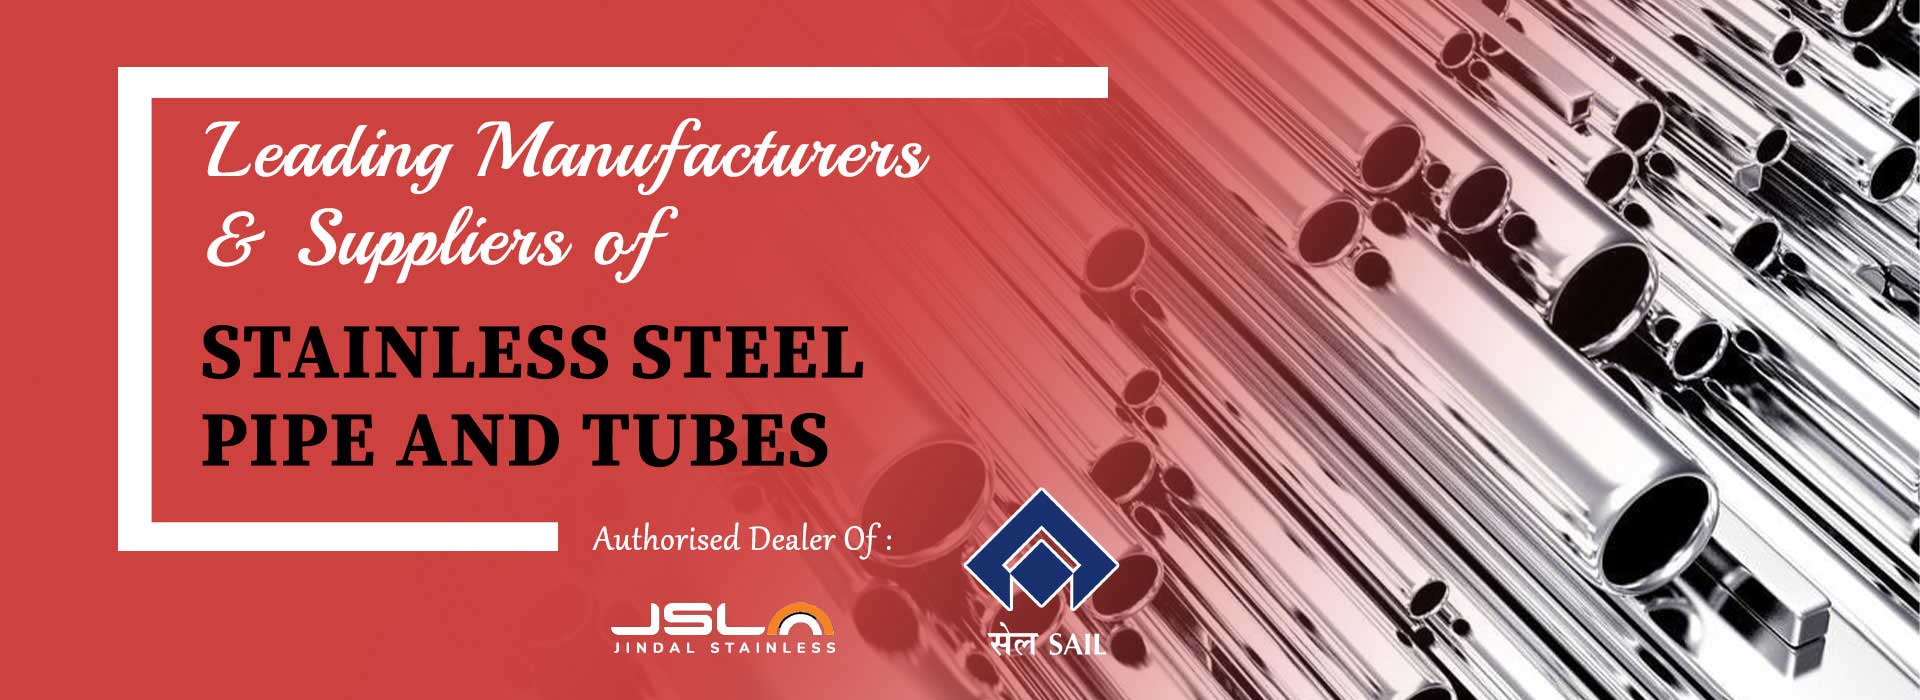 Stainless Steel Pipe and Tubes Manufacturers in Chennai